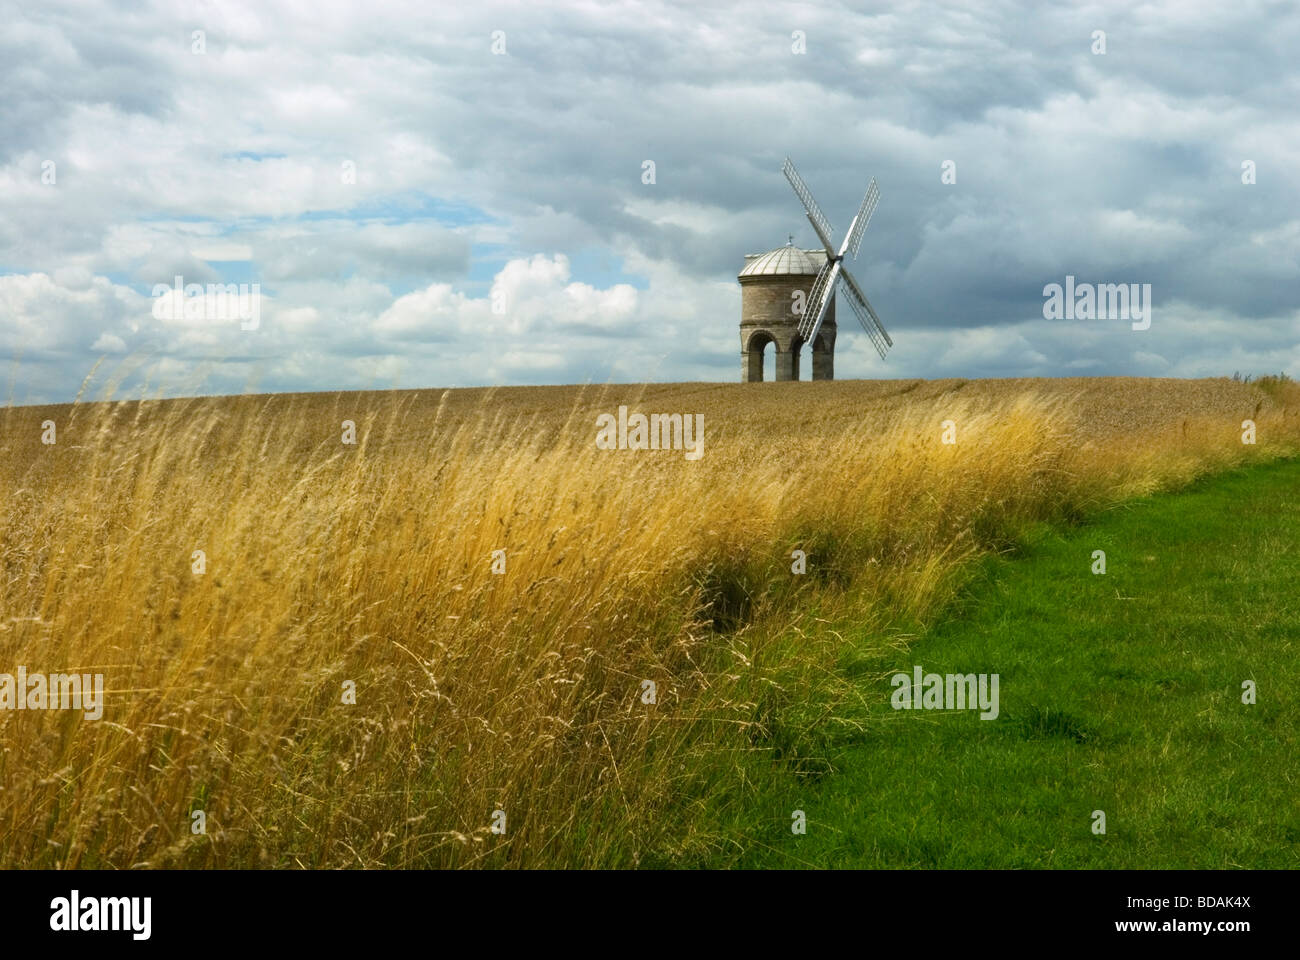 Chesterton Windmill set in a field of ripening Wheat Stock Photo